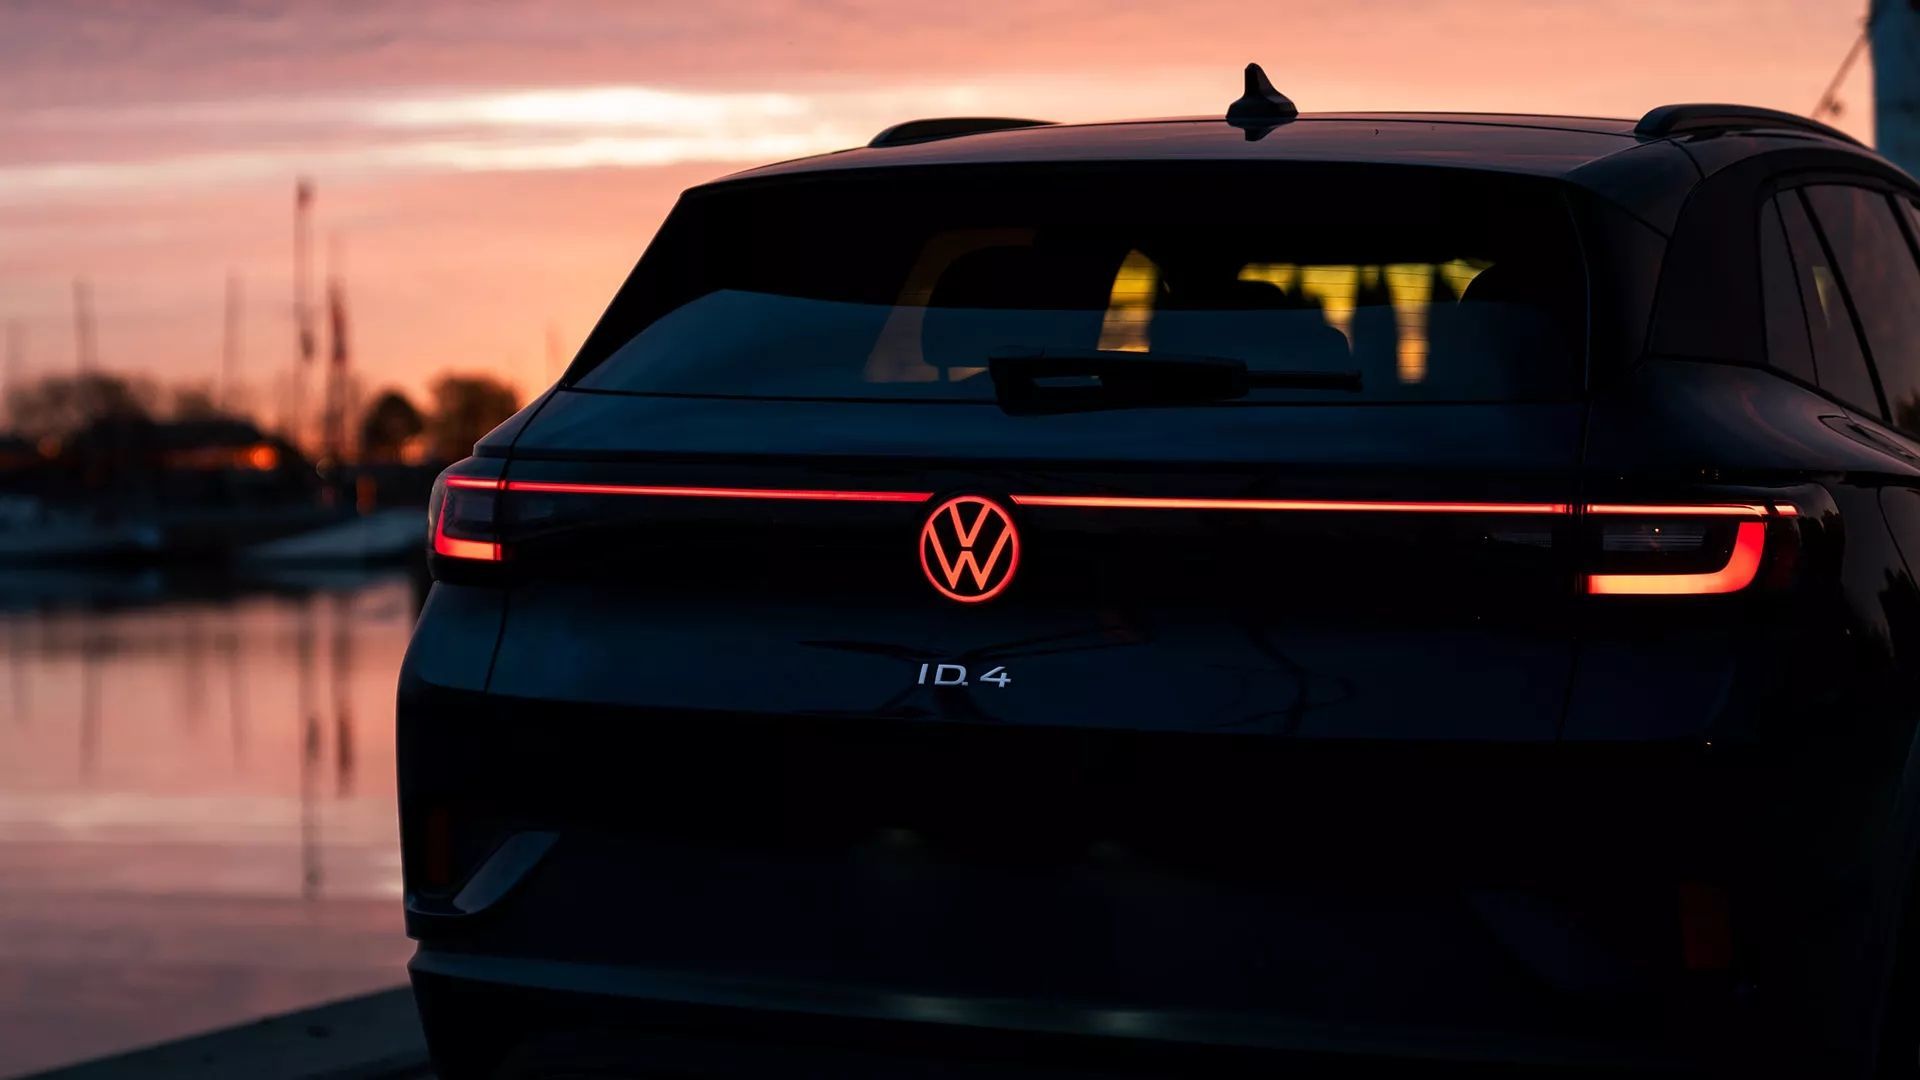 Volkswagen ID.4 2024 with rear lights on at sunset